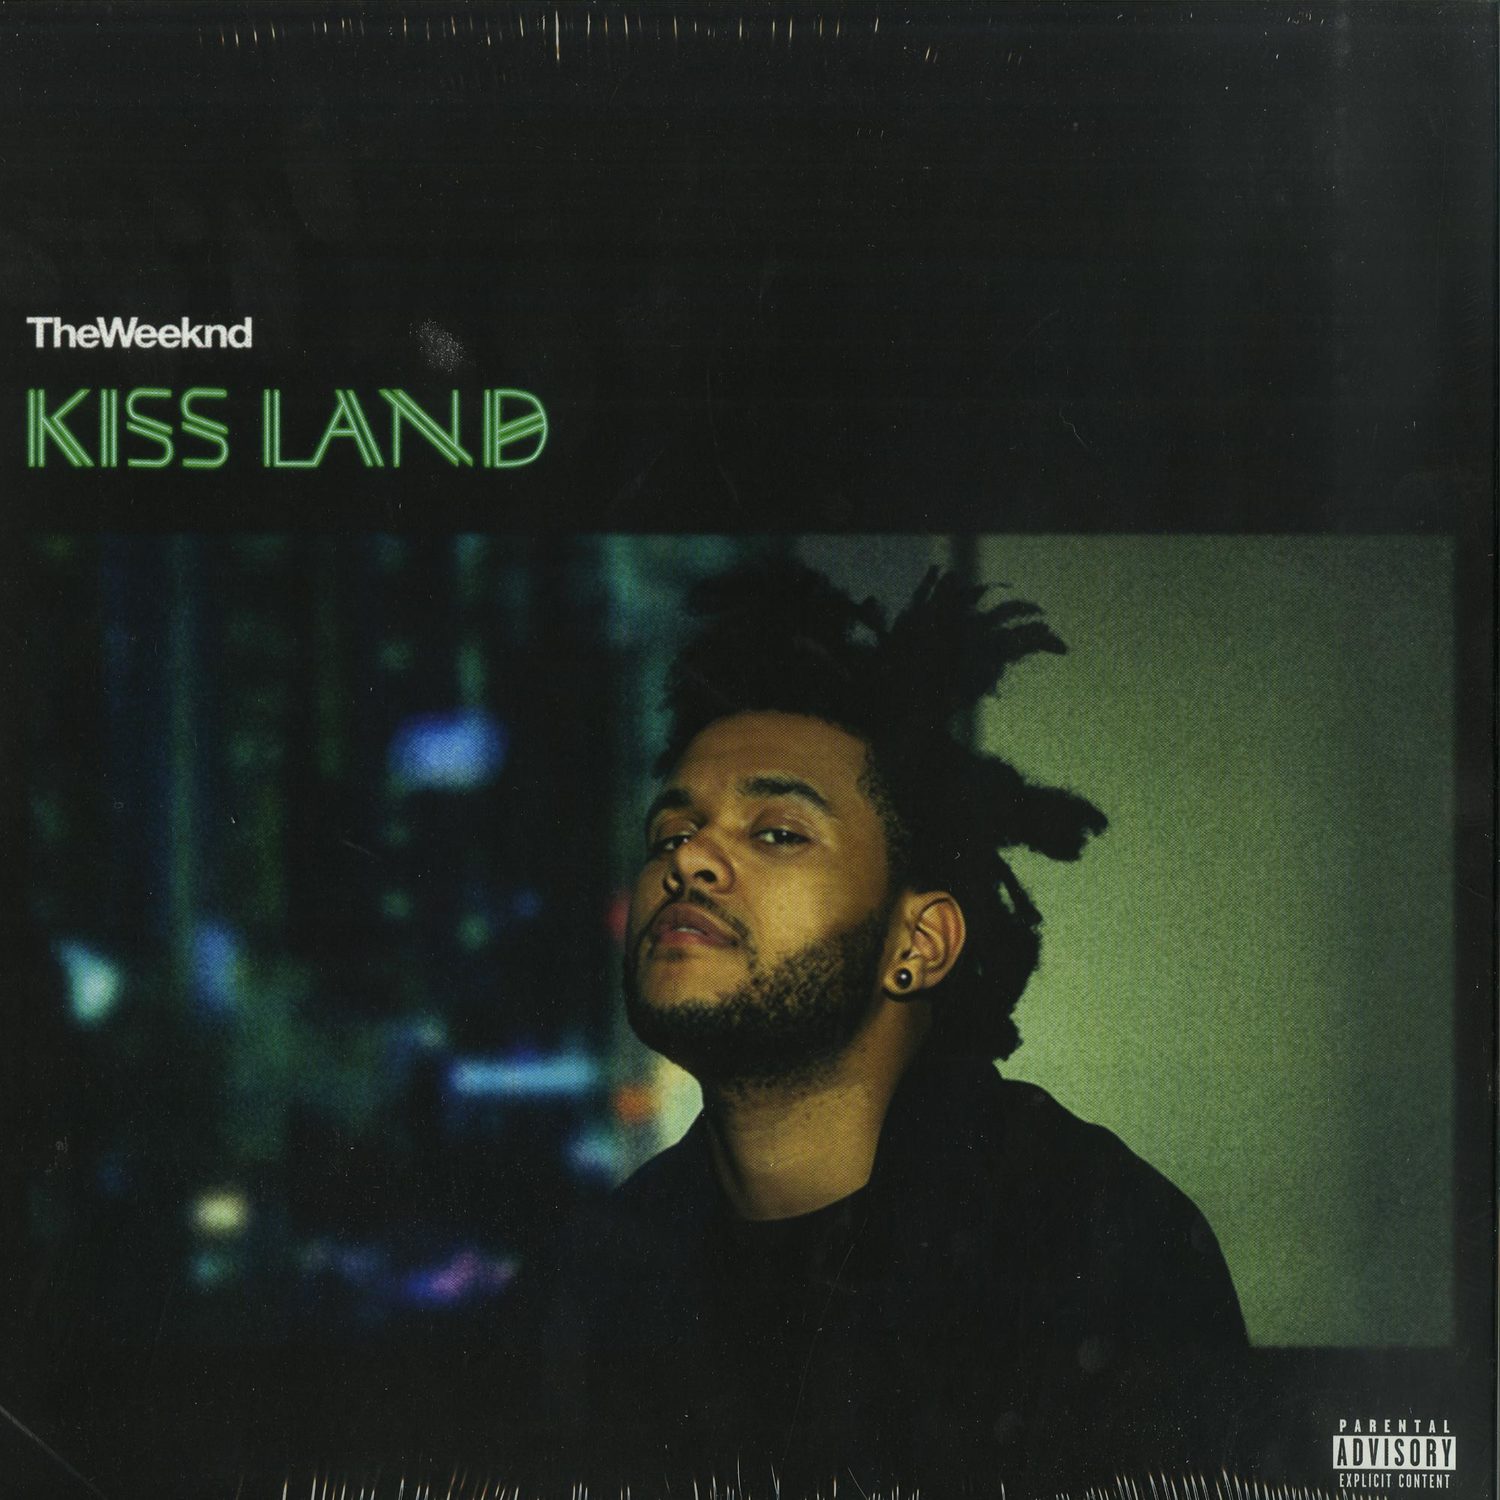 The Weeknd - KISS LAND 